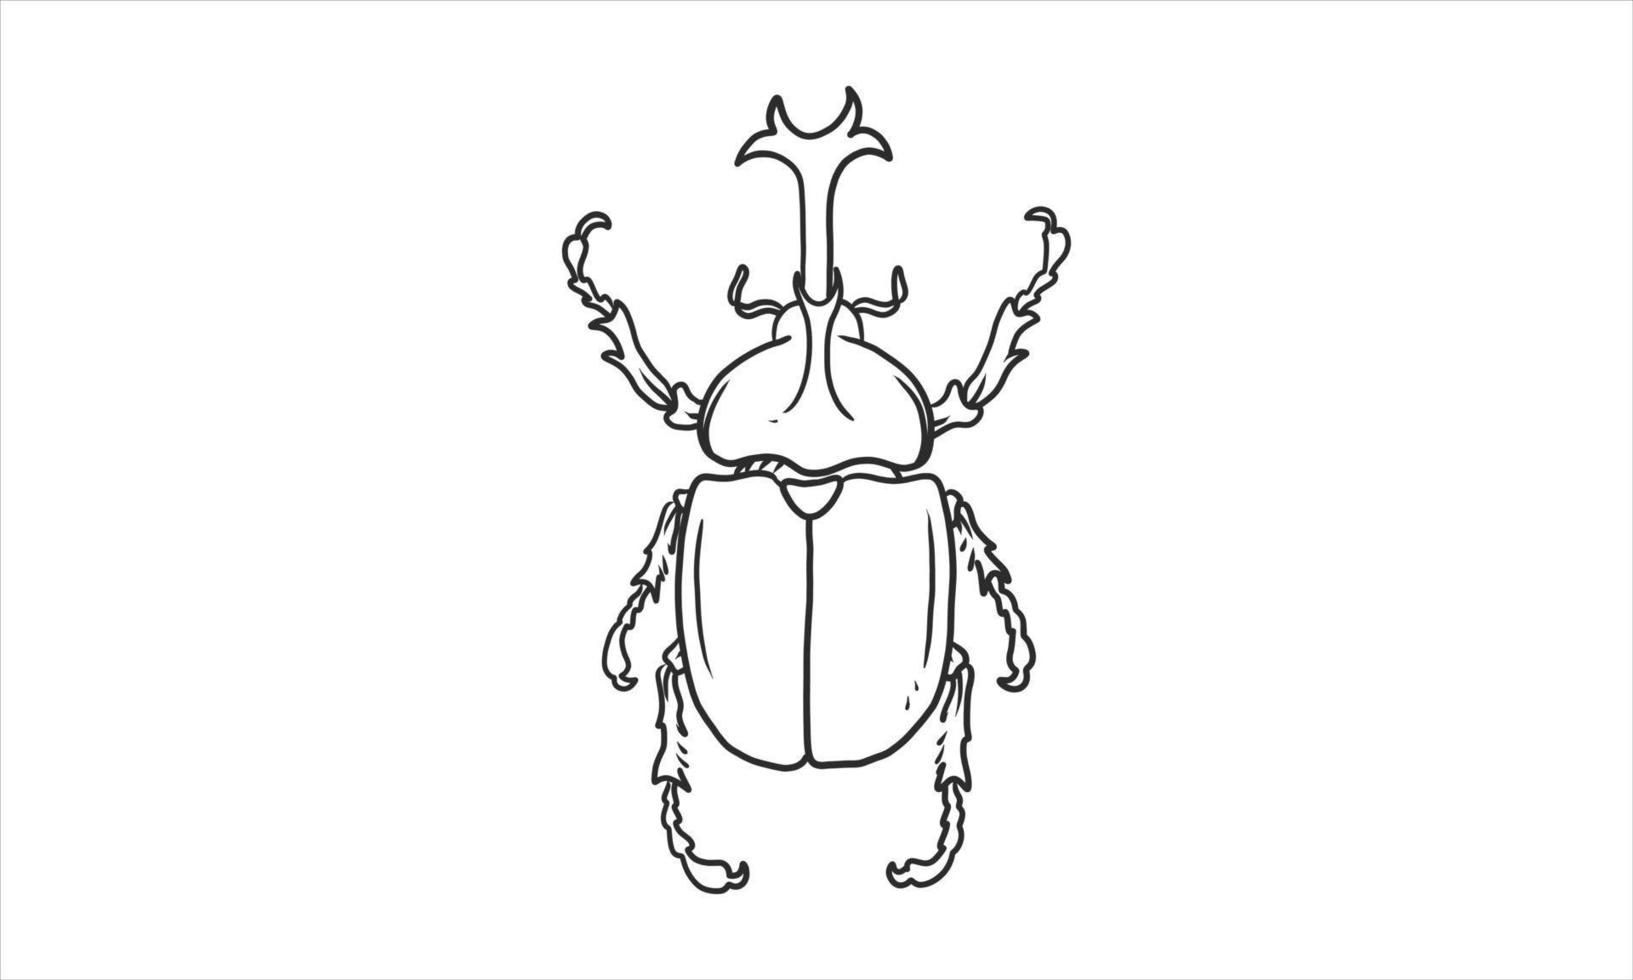 Beetle illustration in an uncolored hand drawn vector